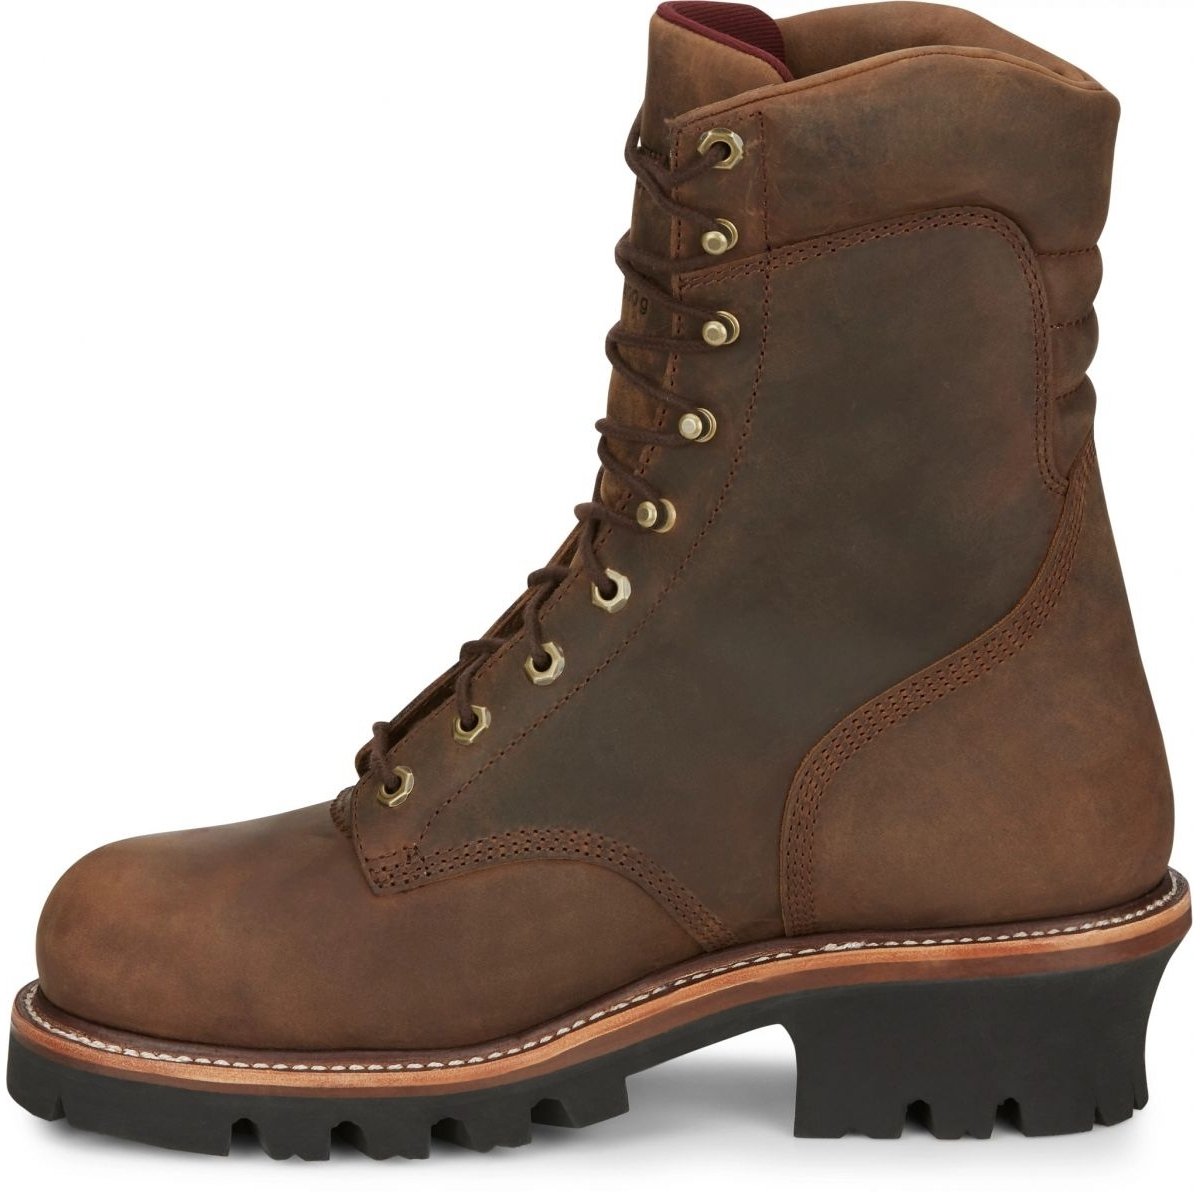 Chippewa Men's 9 Super DNA Steel Toe Waterproof Insulated Logger Work Boot Bay Apache - 59405 ONE SIZE BROWN - BROWN, 10.5 Wide